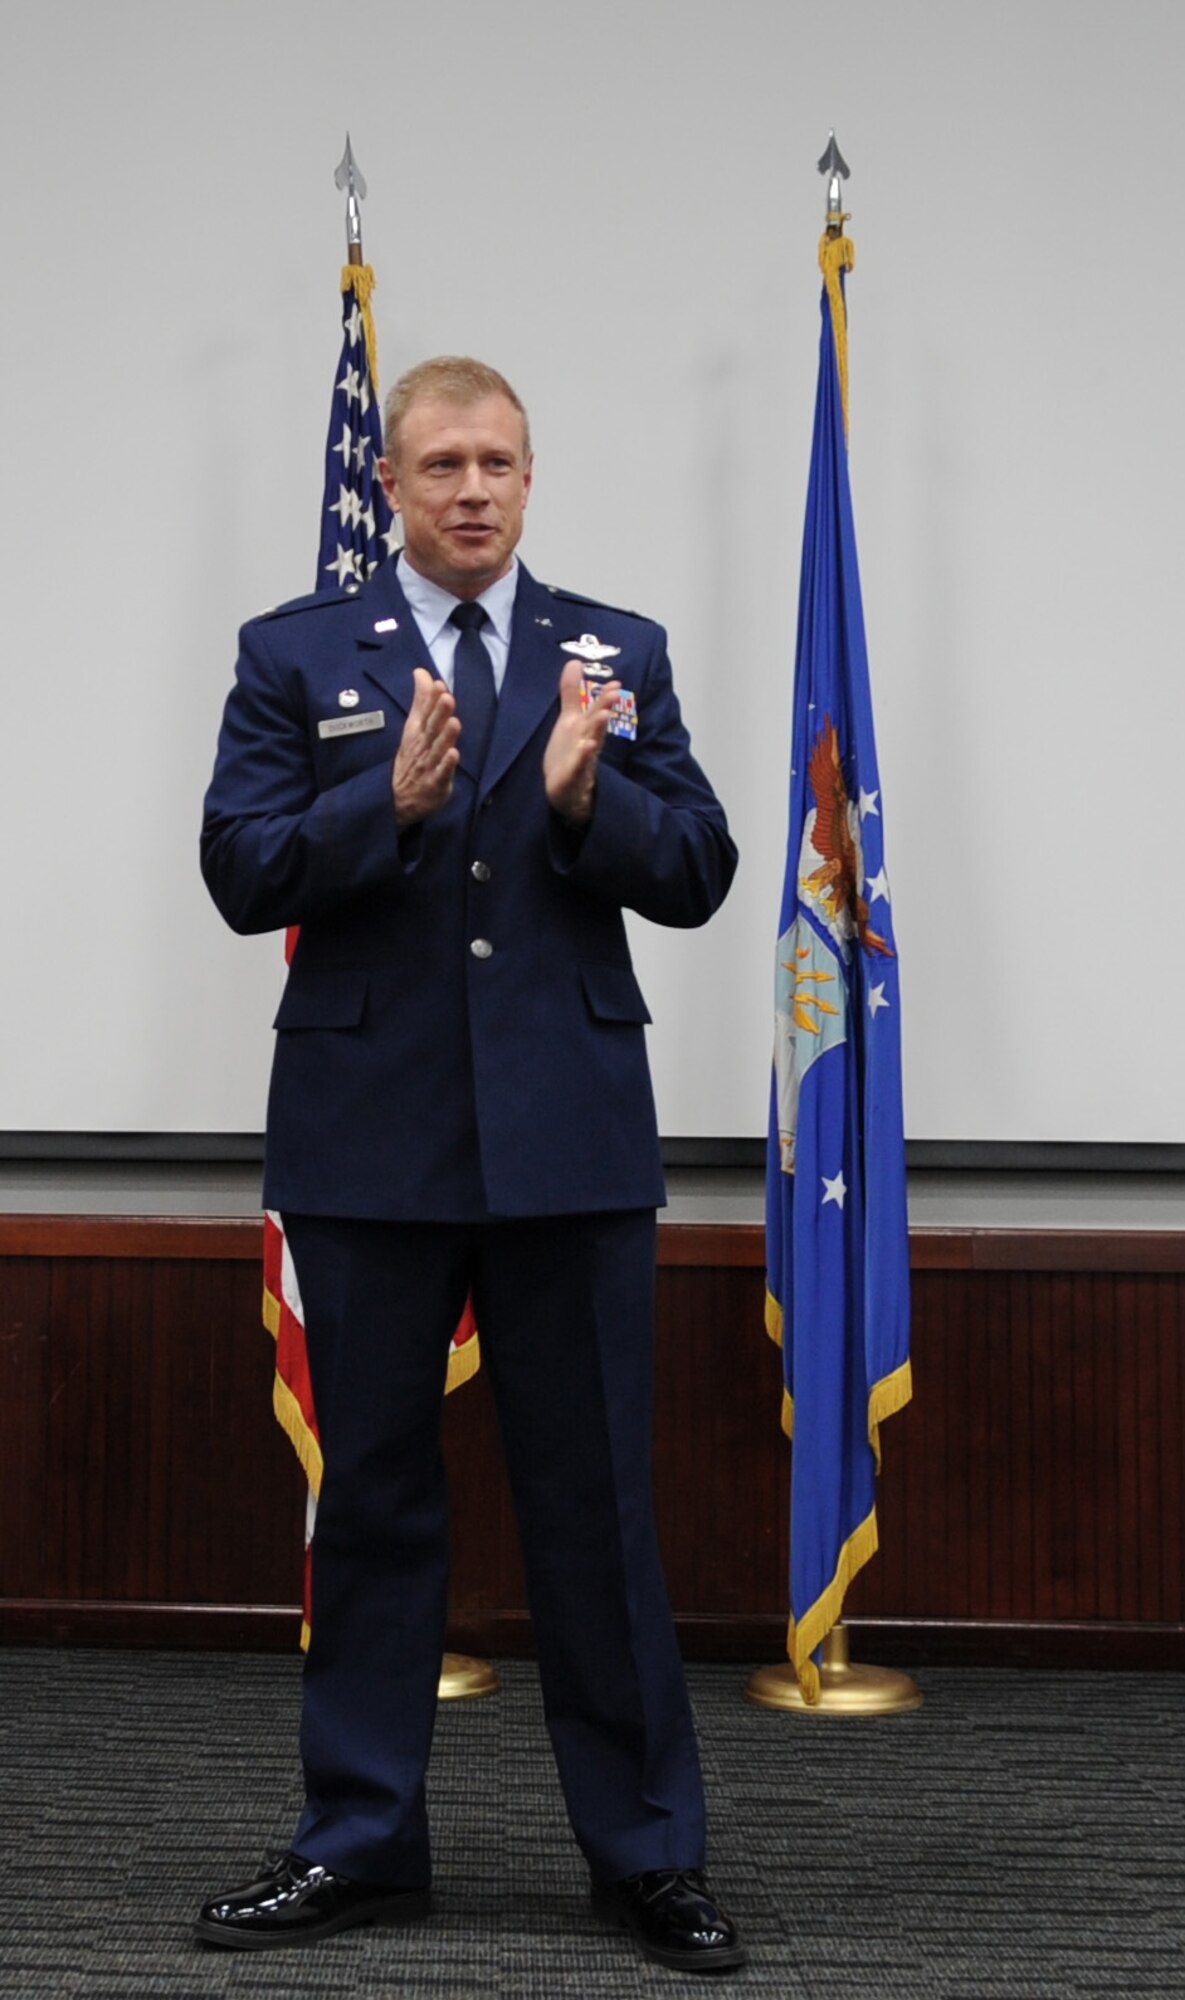 340th Flying Training Group Commander Col. Allen Duckworth makes opening comments during the Aug. 29 retirement ceremony at Joint Base San Antonio-Randolph, Texas for Lt. Col. Timothy Chapman, former 340th FTG Reserve Undergraduate Flying Training Program manager.  (U.S. Air Force photo by Debbie Gildea)